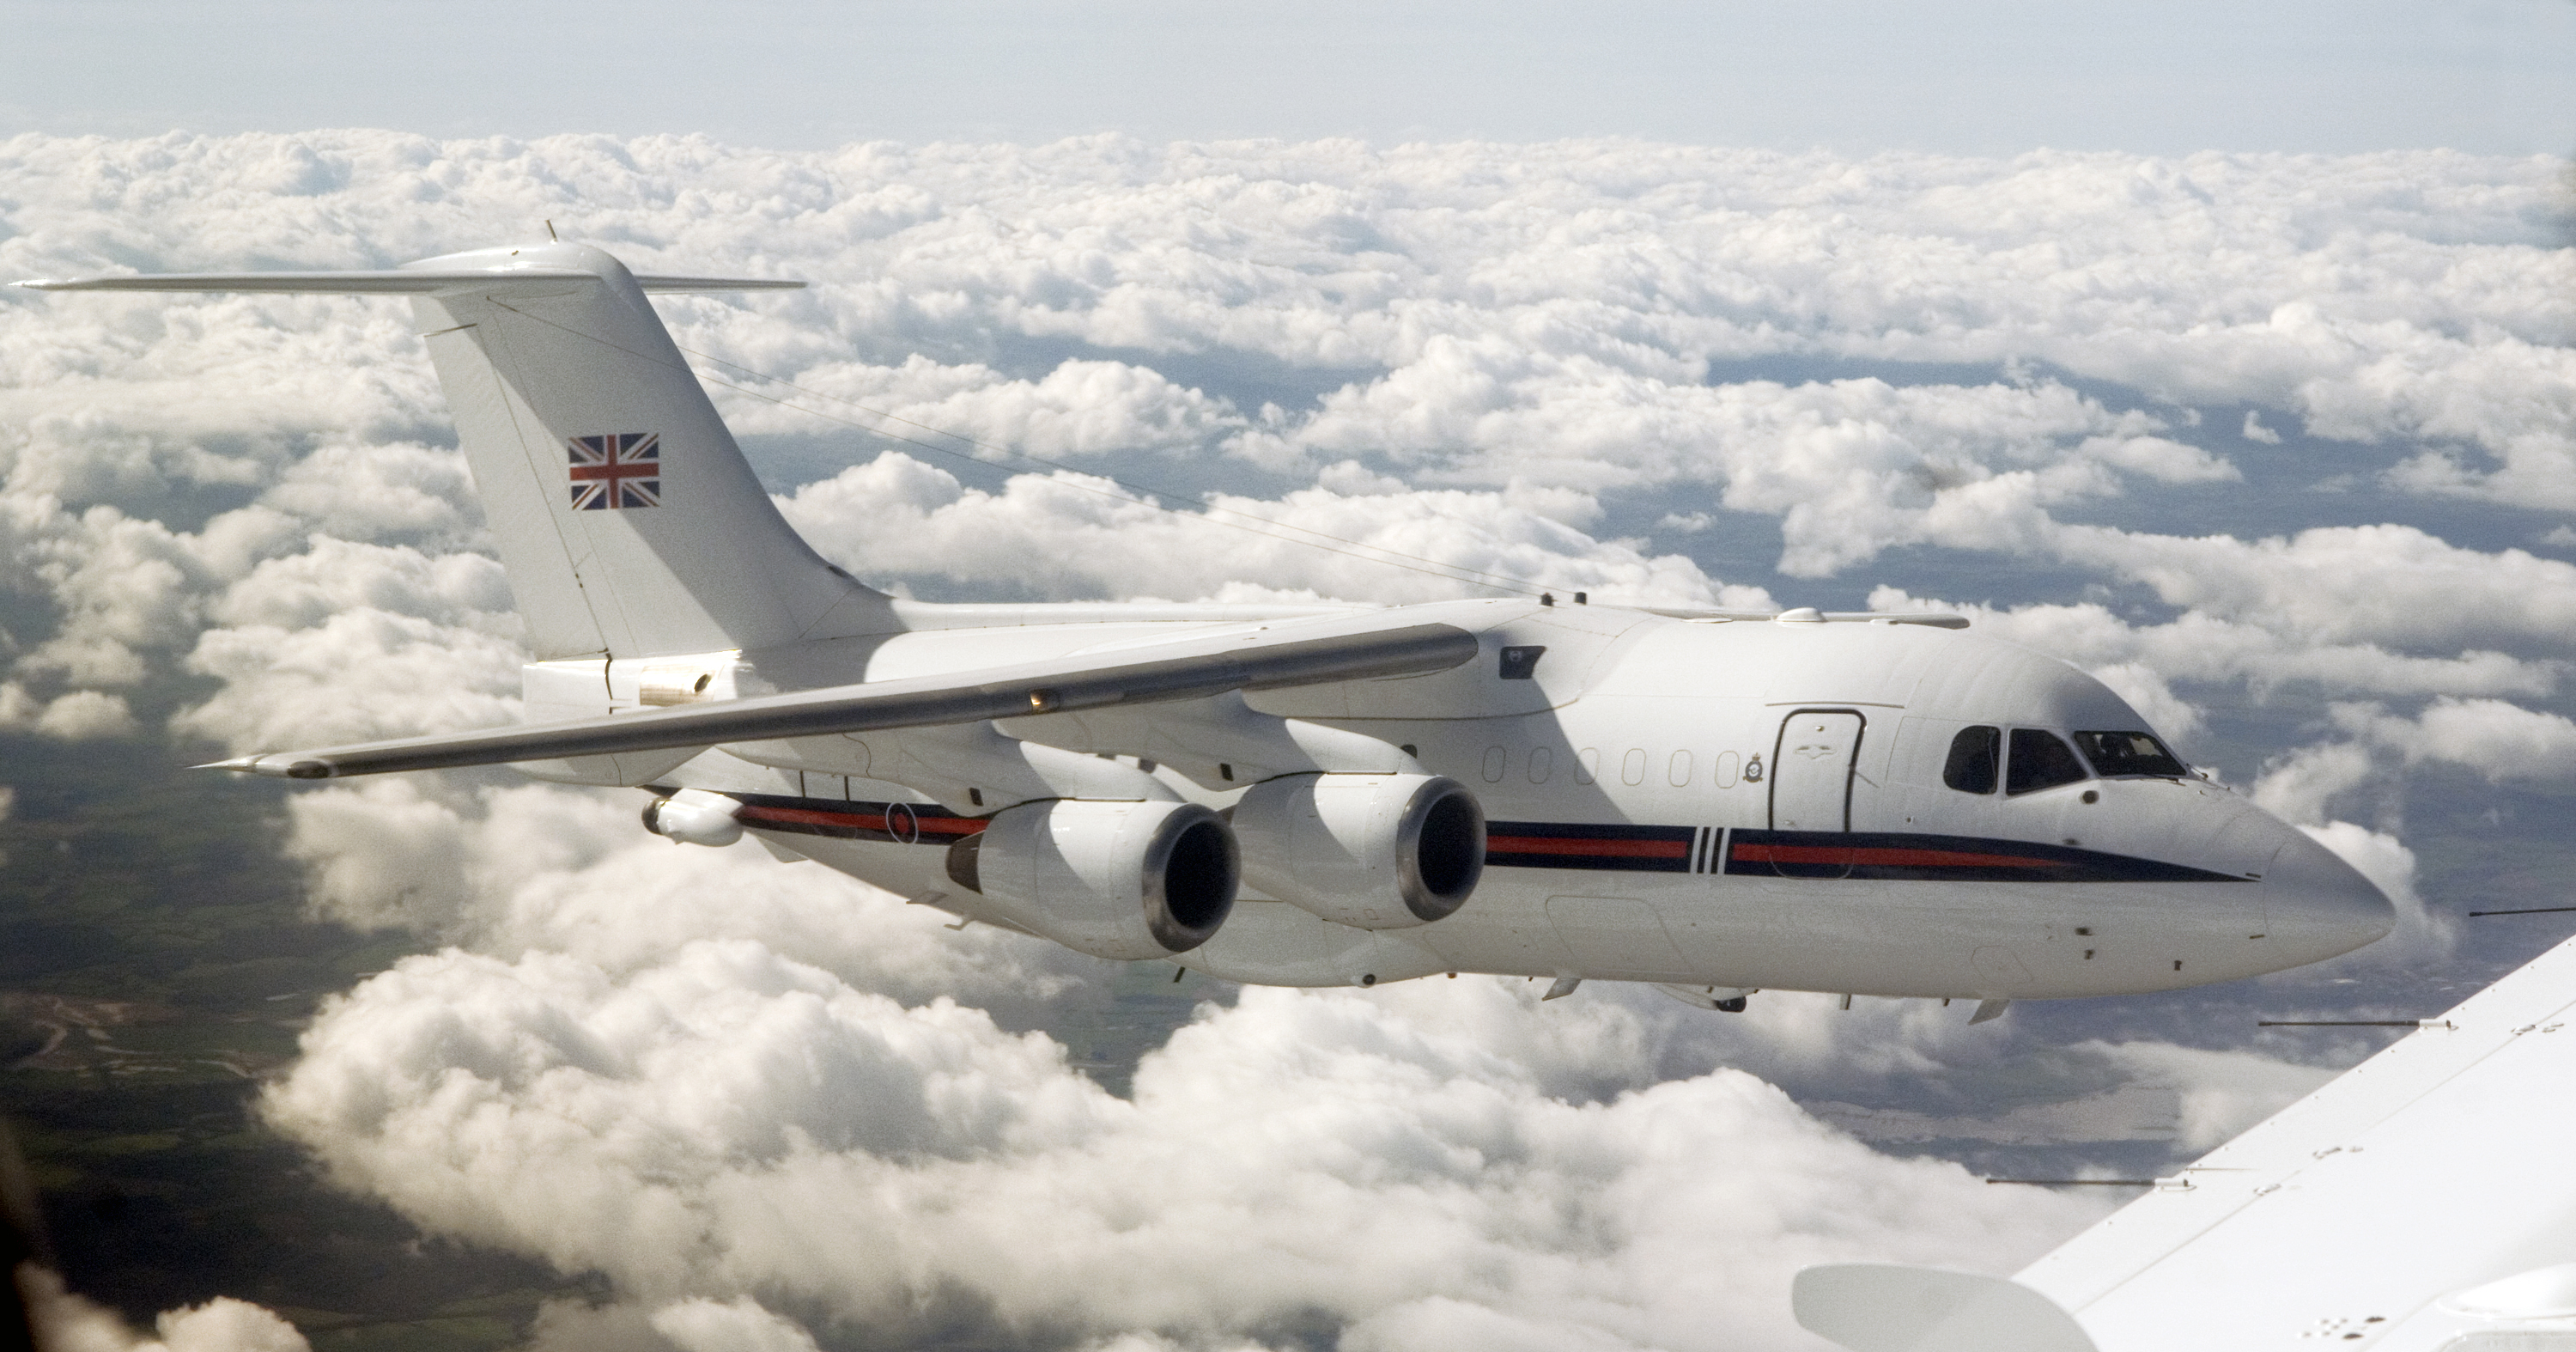 BAe146_aircraft_from_A_Flight_of_32_(The_Royal)_Squadron_MOD_45147912.jpg